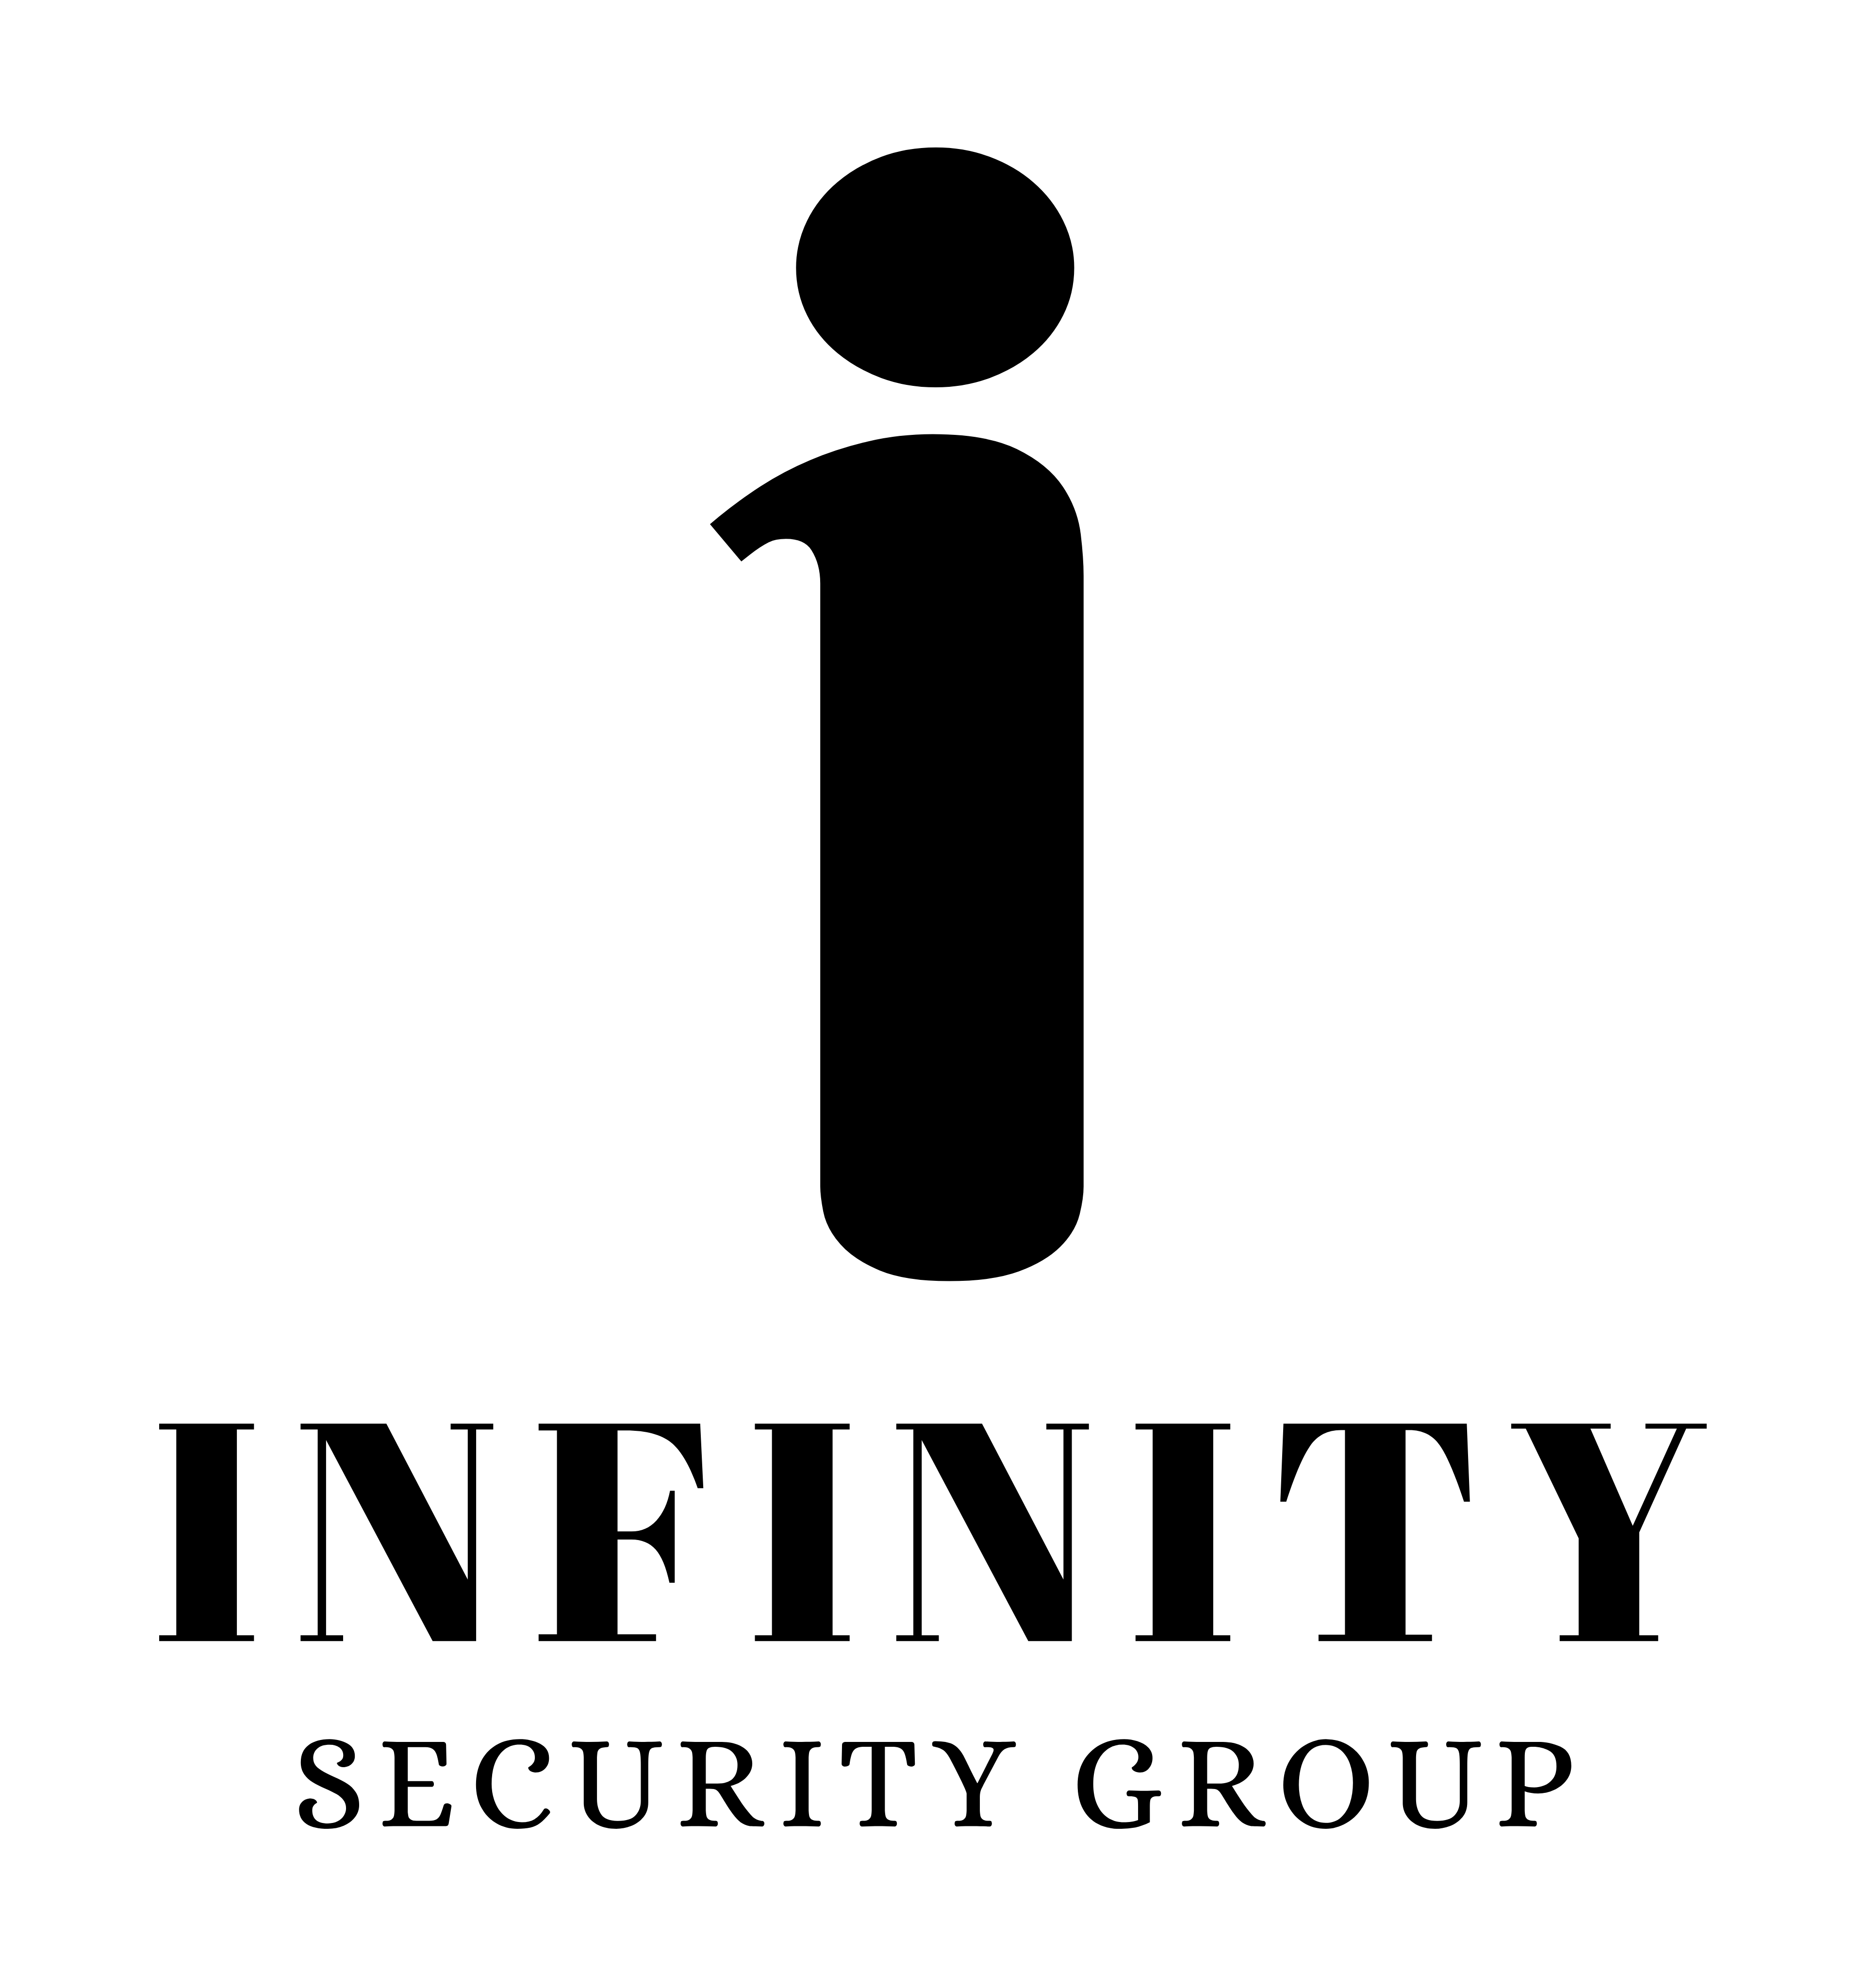 INFINITY SECURITY GROUP